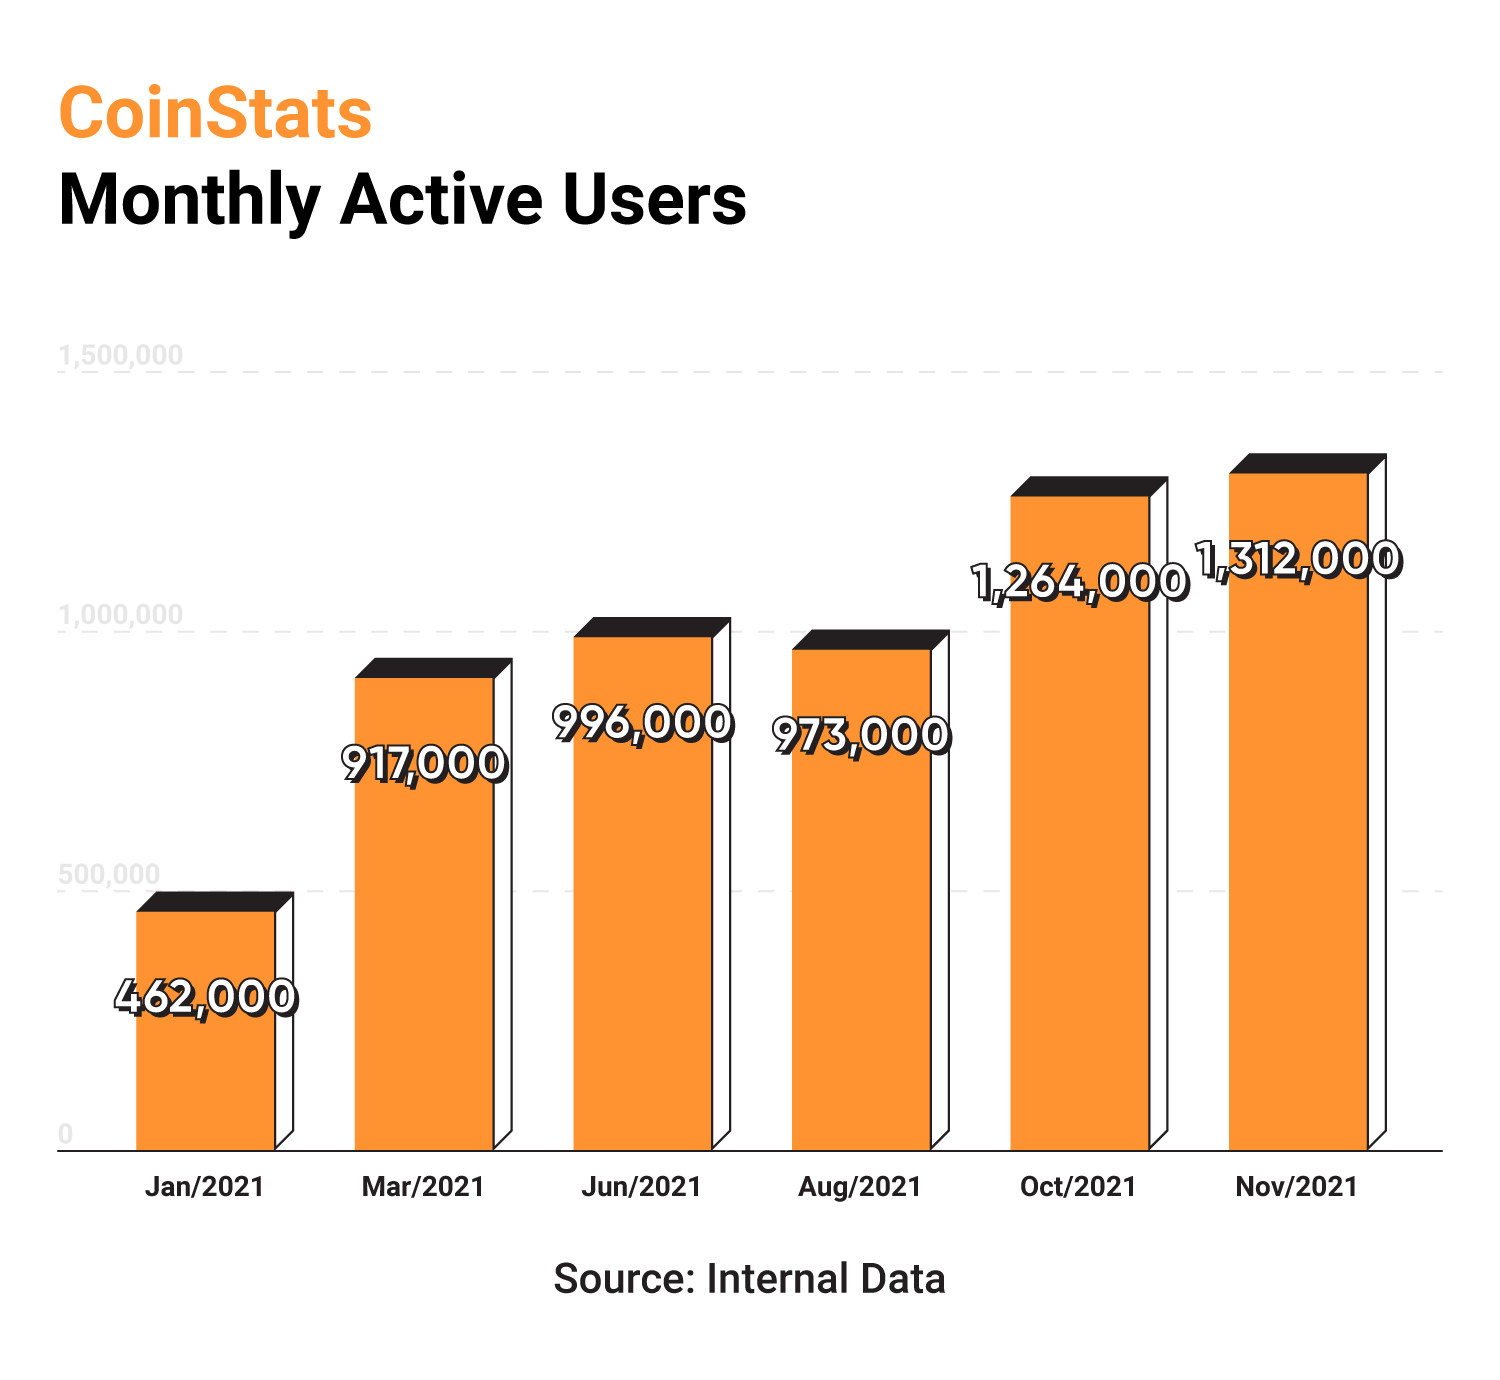 CoinStats Monthly Active Users 2021